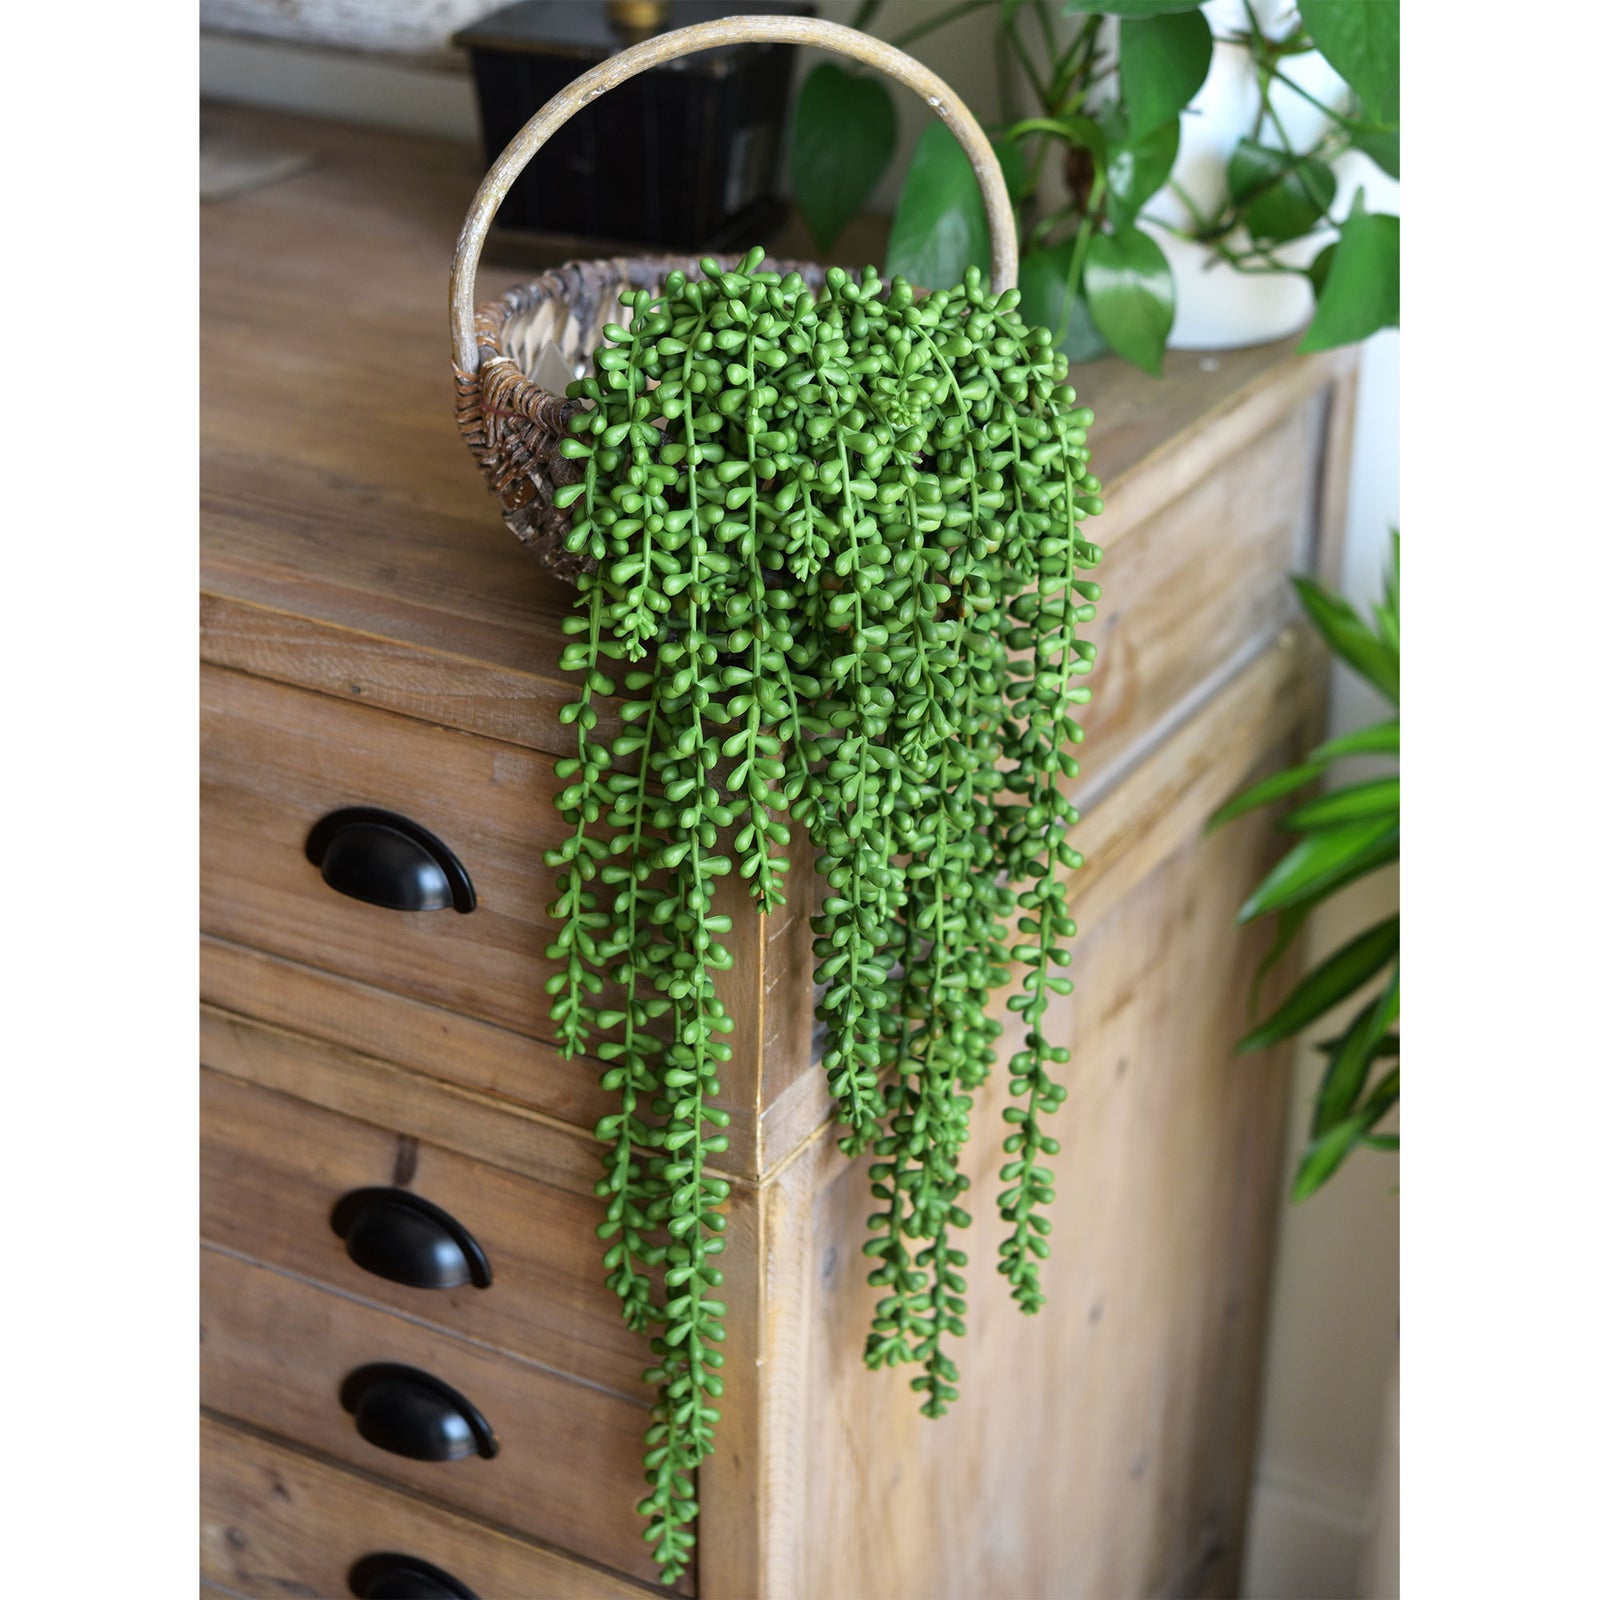 Dahey Artificial Succulents Hanging Plants Fake String of Pearls in